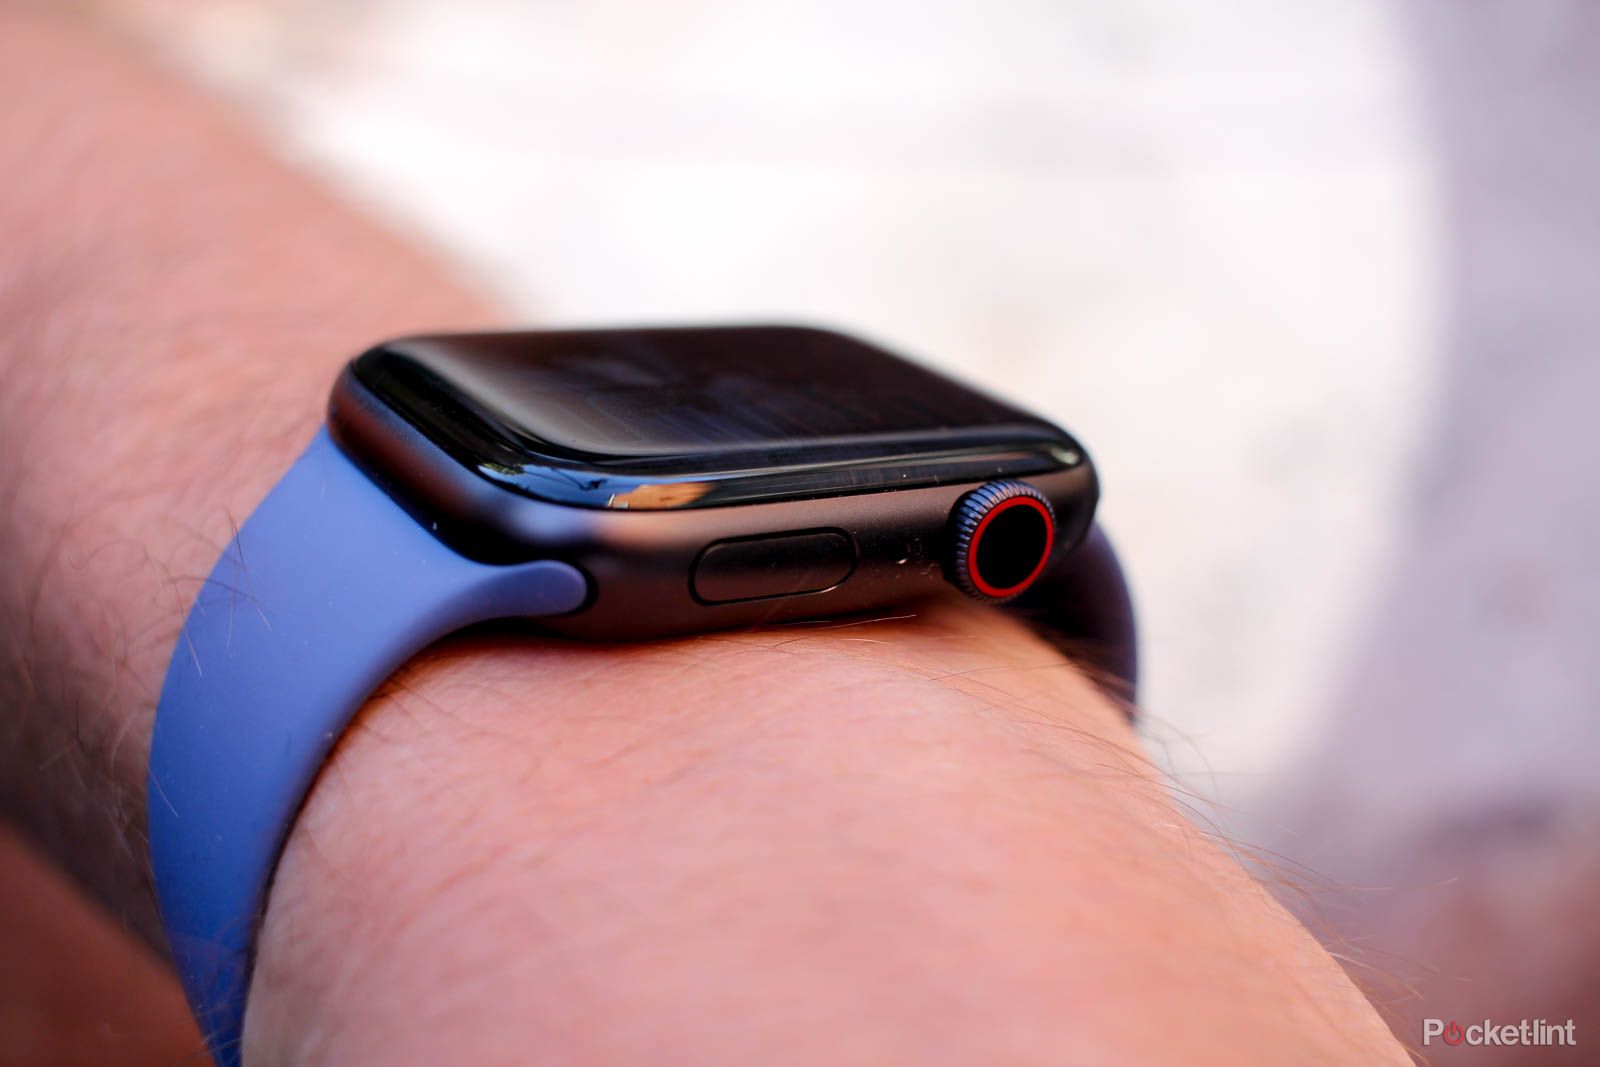 The Apple Watch could get a Digital Crown with touch and light sensors image 1